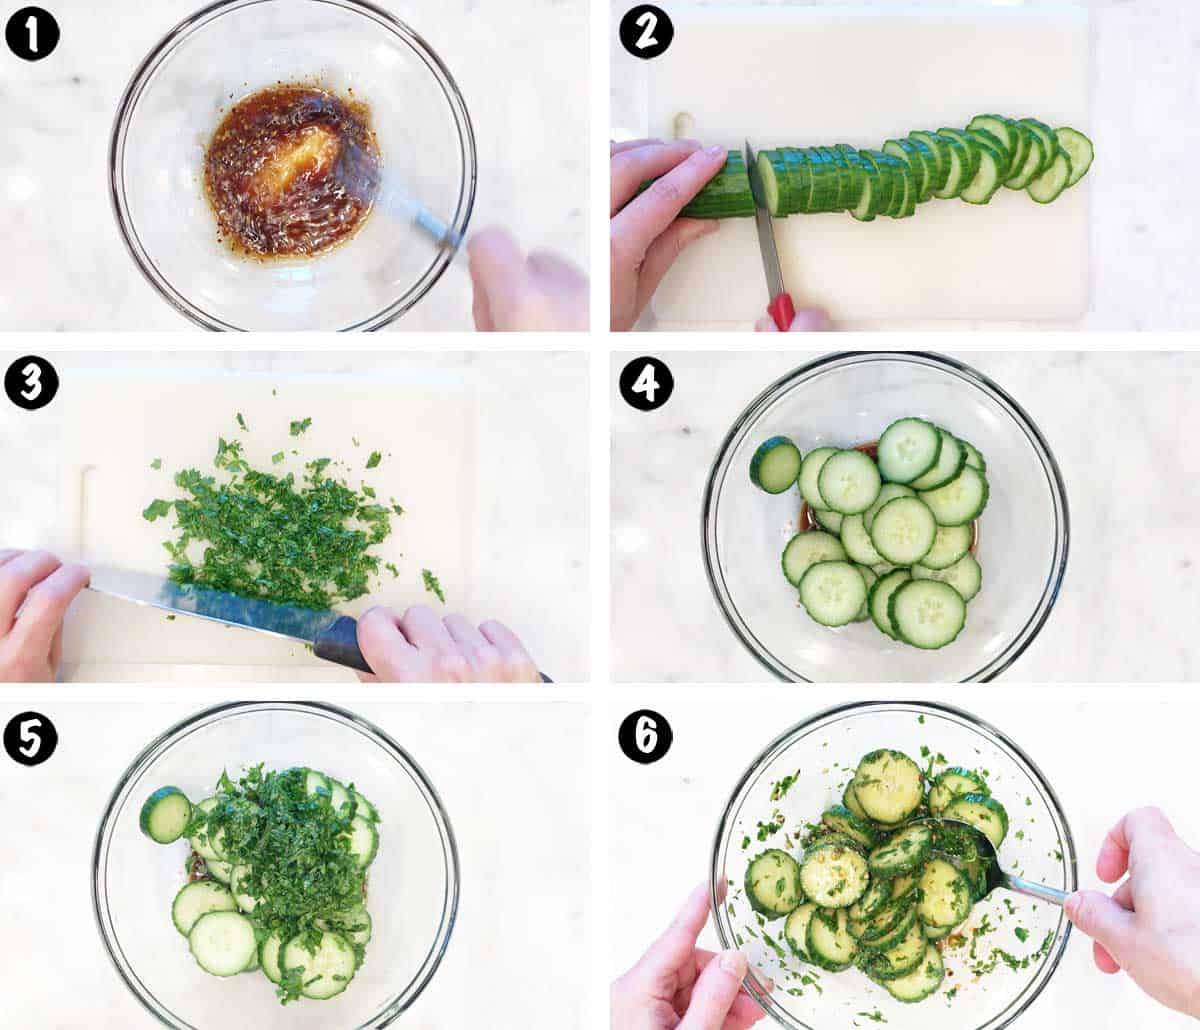 A photo collage showing the steps for making an Asian-style cucumber salad. 